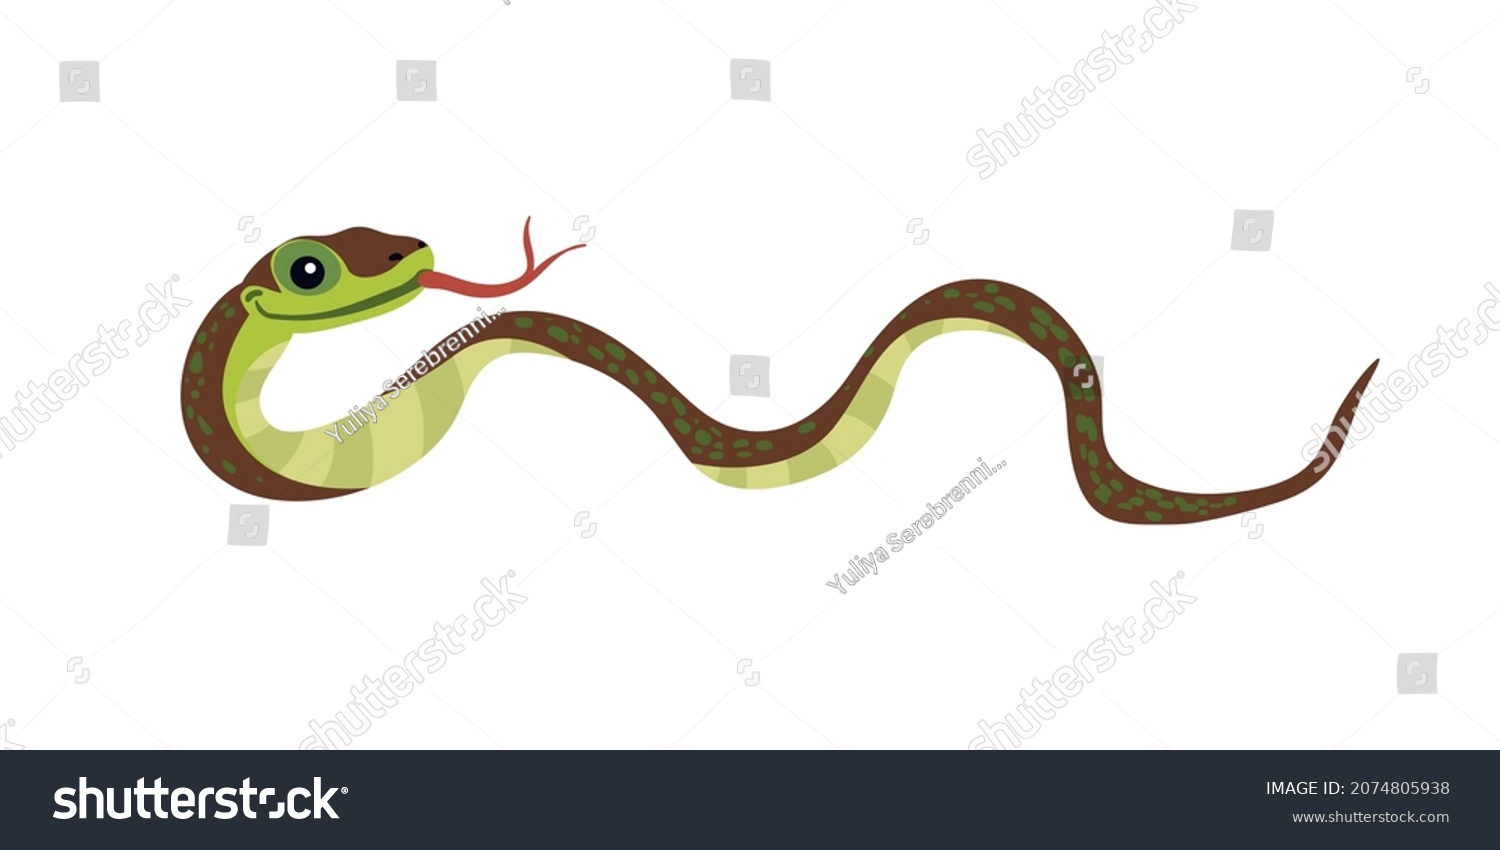 SVG of Cute green snake cartoon on white background. svg